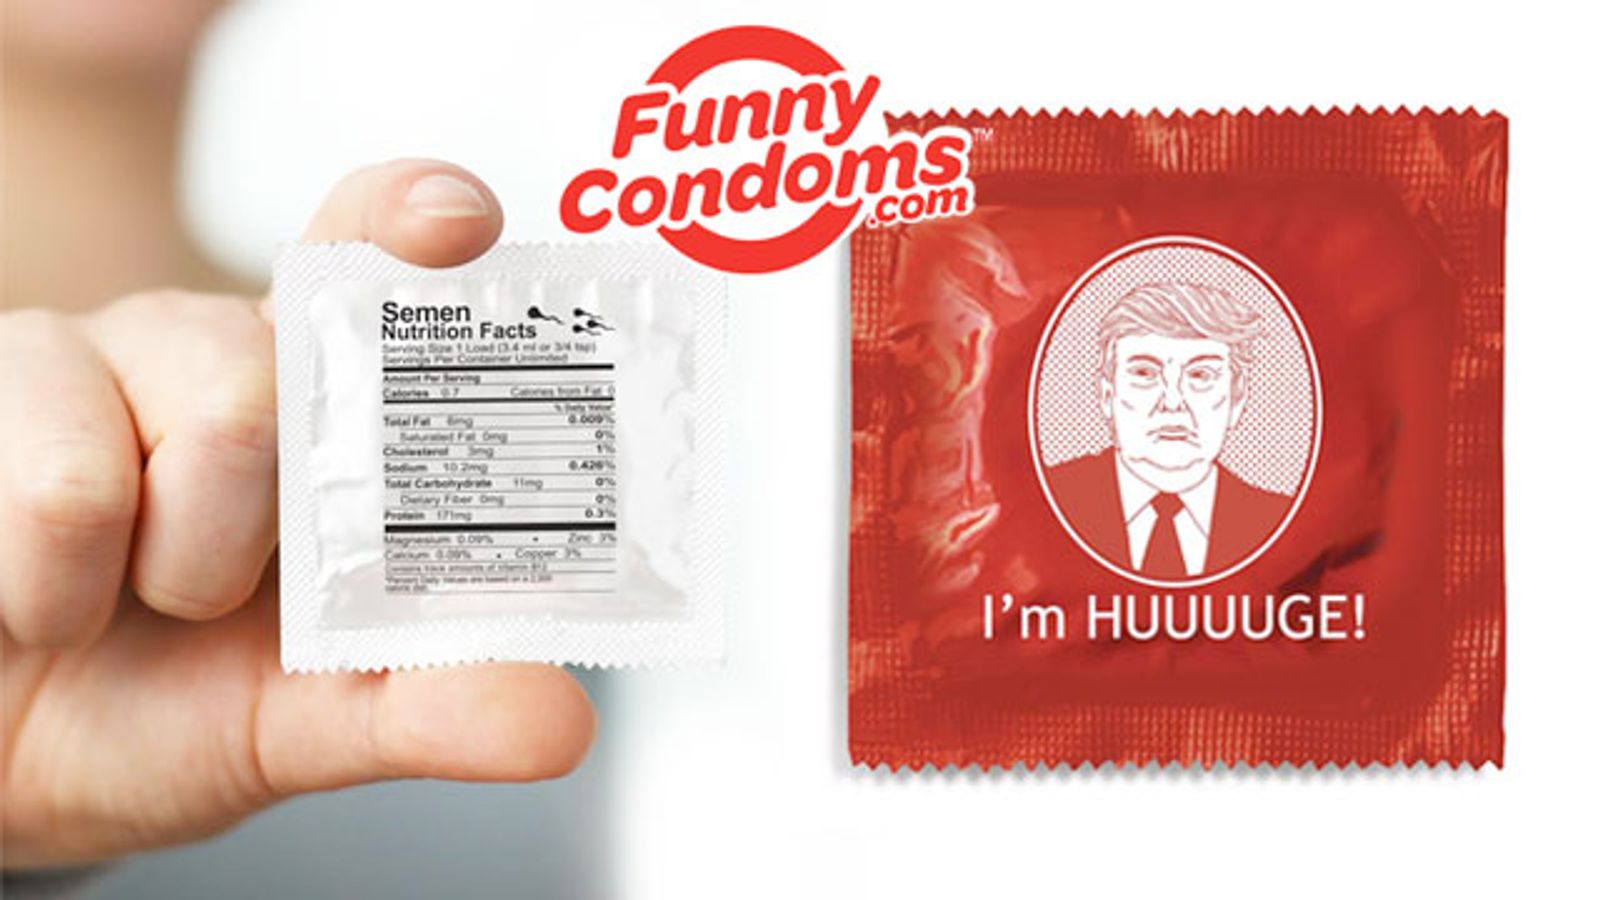 FunnyCondoms.com Off and Running ... and Ready for the Election